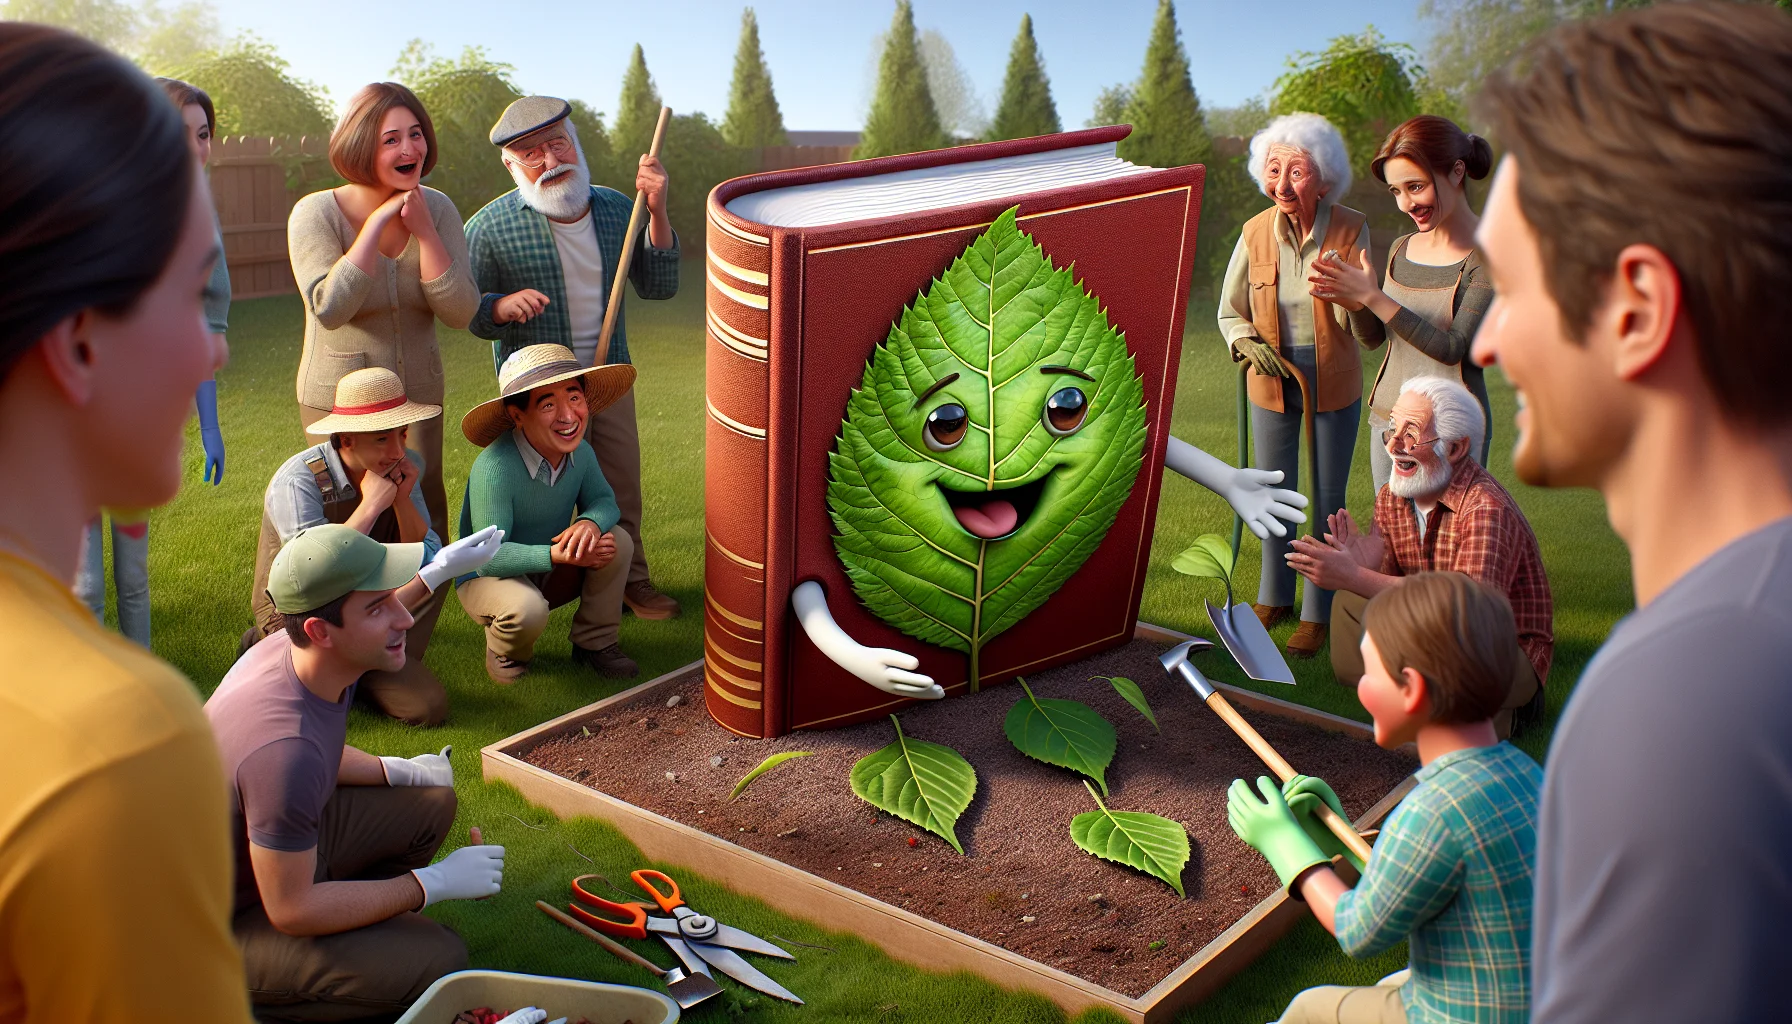 Create a realistic and amusing image featuring a comprehensive Leaf Casting Guide. The guide, depicted as an anthropomorphic book, has a face on its cover and thus shows expressions. The humorous scenario involves the book demonstrating leaf casting, with its pages interacting with real leaves and garden tools. It is surrounded by diverse people of different ages and genders, including a Hispanic elderly woman, a Middle Eastern young man, and a Caucasian child, all wearing gardening hats and gloves, watching the leaf casting demonstration with excitement and laughter. This image aims to inspire viewer interest in gardening.